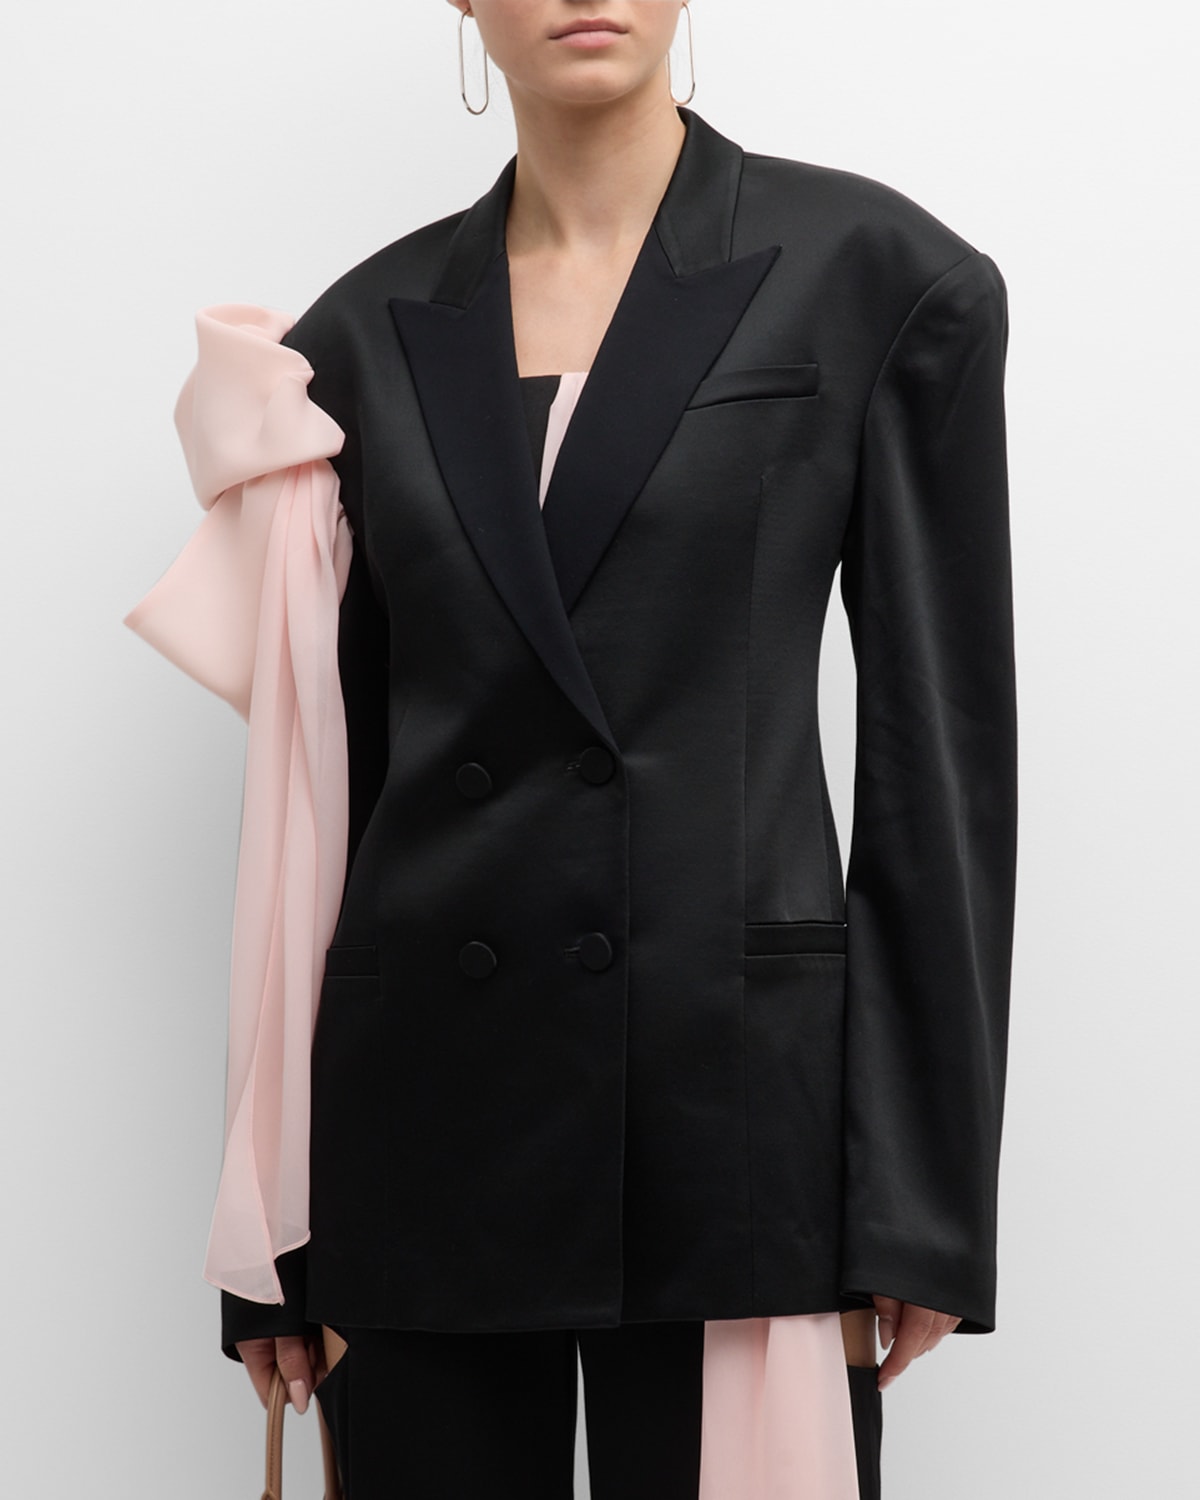 Hellessy Didier Draped Bow Double-breasted Oversized Blazer Jacket In Black/rosette